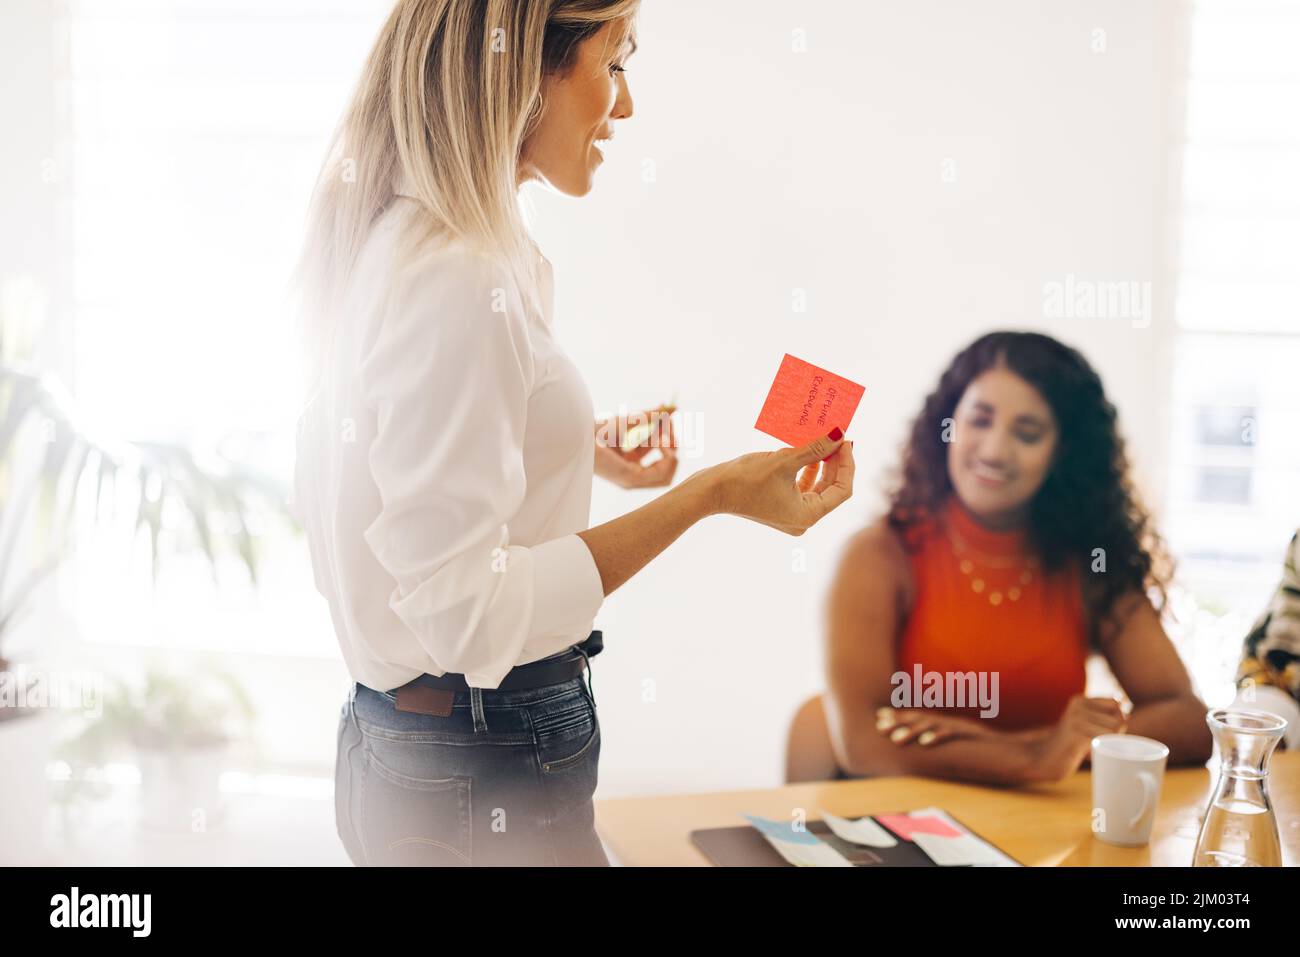 Female entrepreneur presenting her ideas using sticky notes. Young businesswoman brainstorming with her team during a meeting. Creative businesswomen Stock Photo